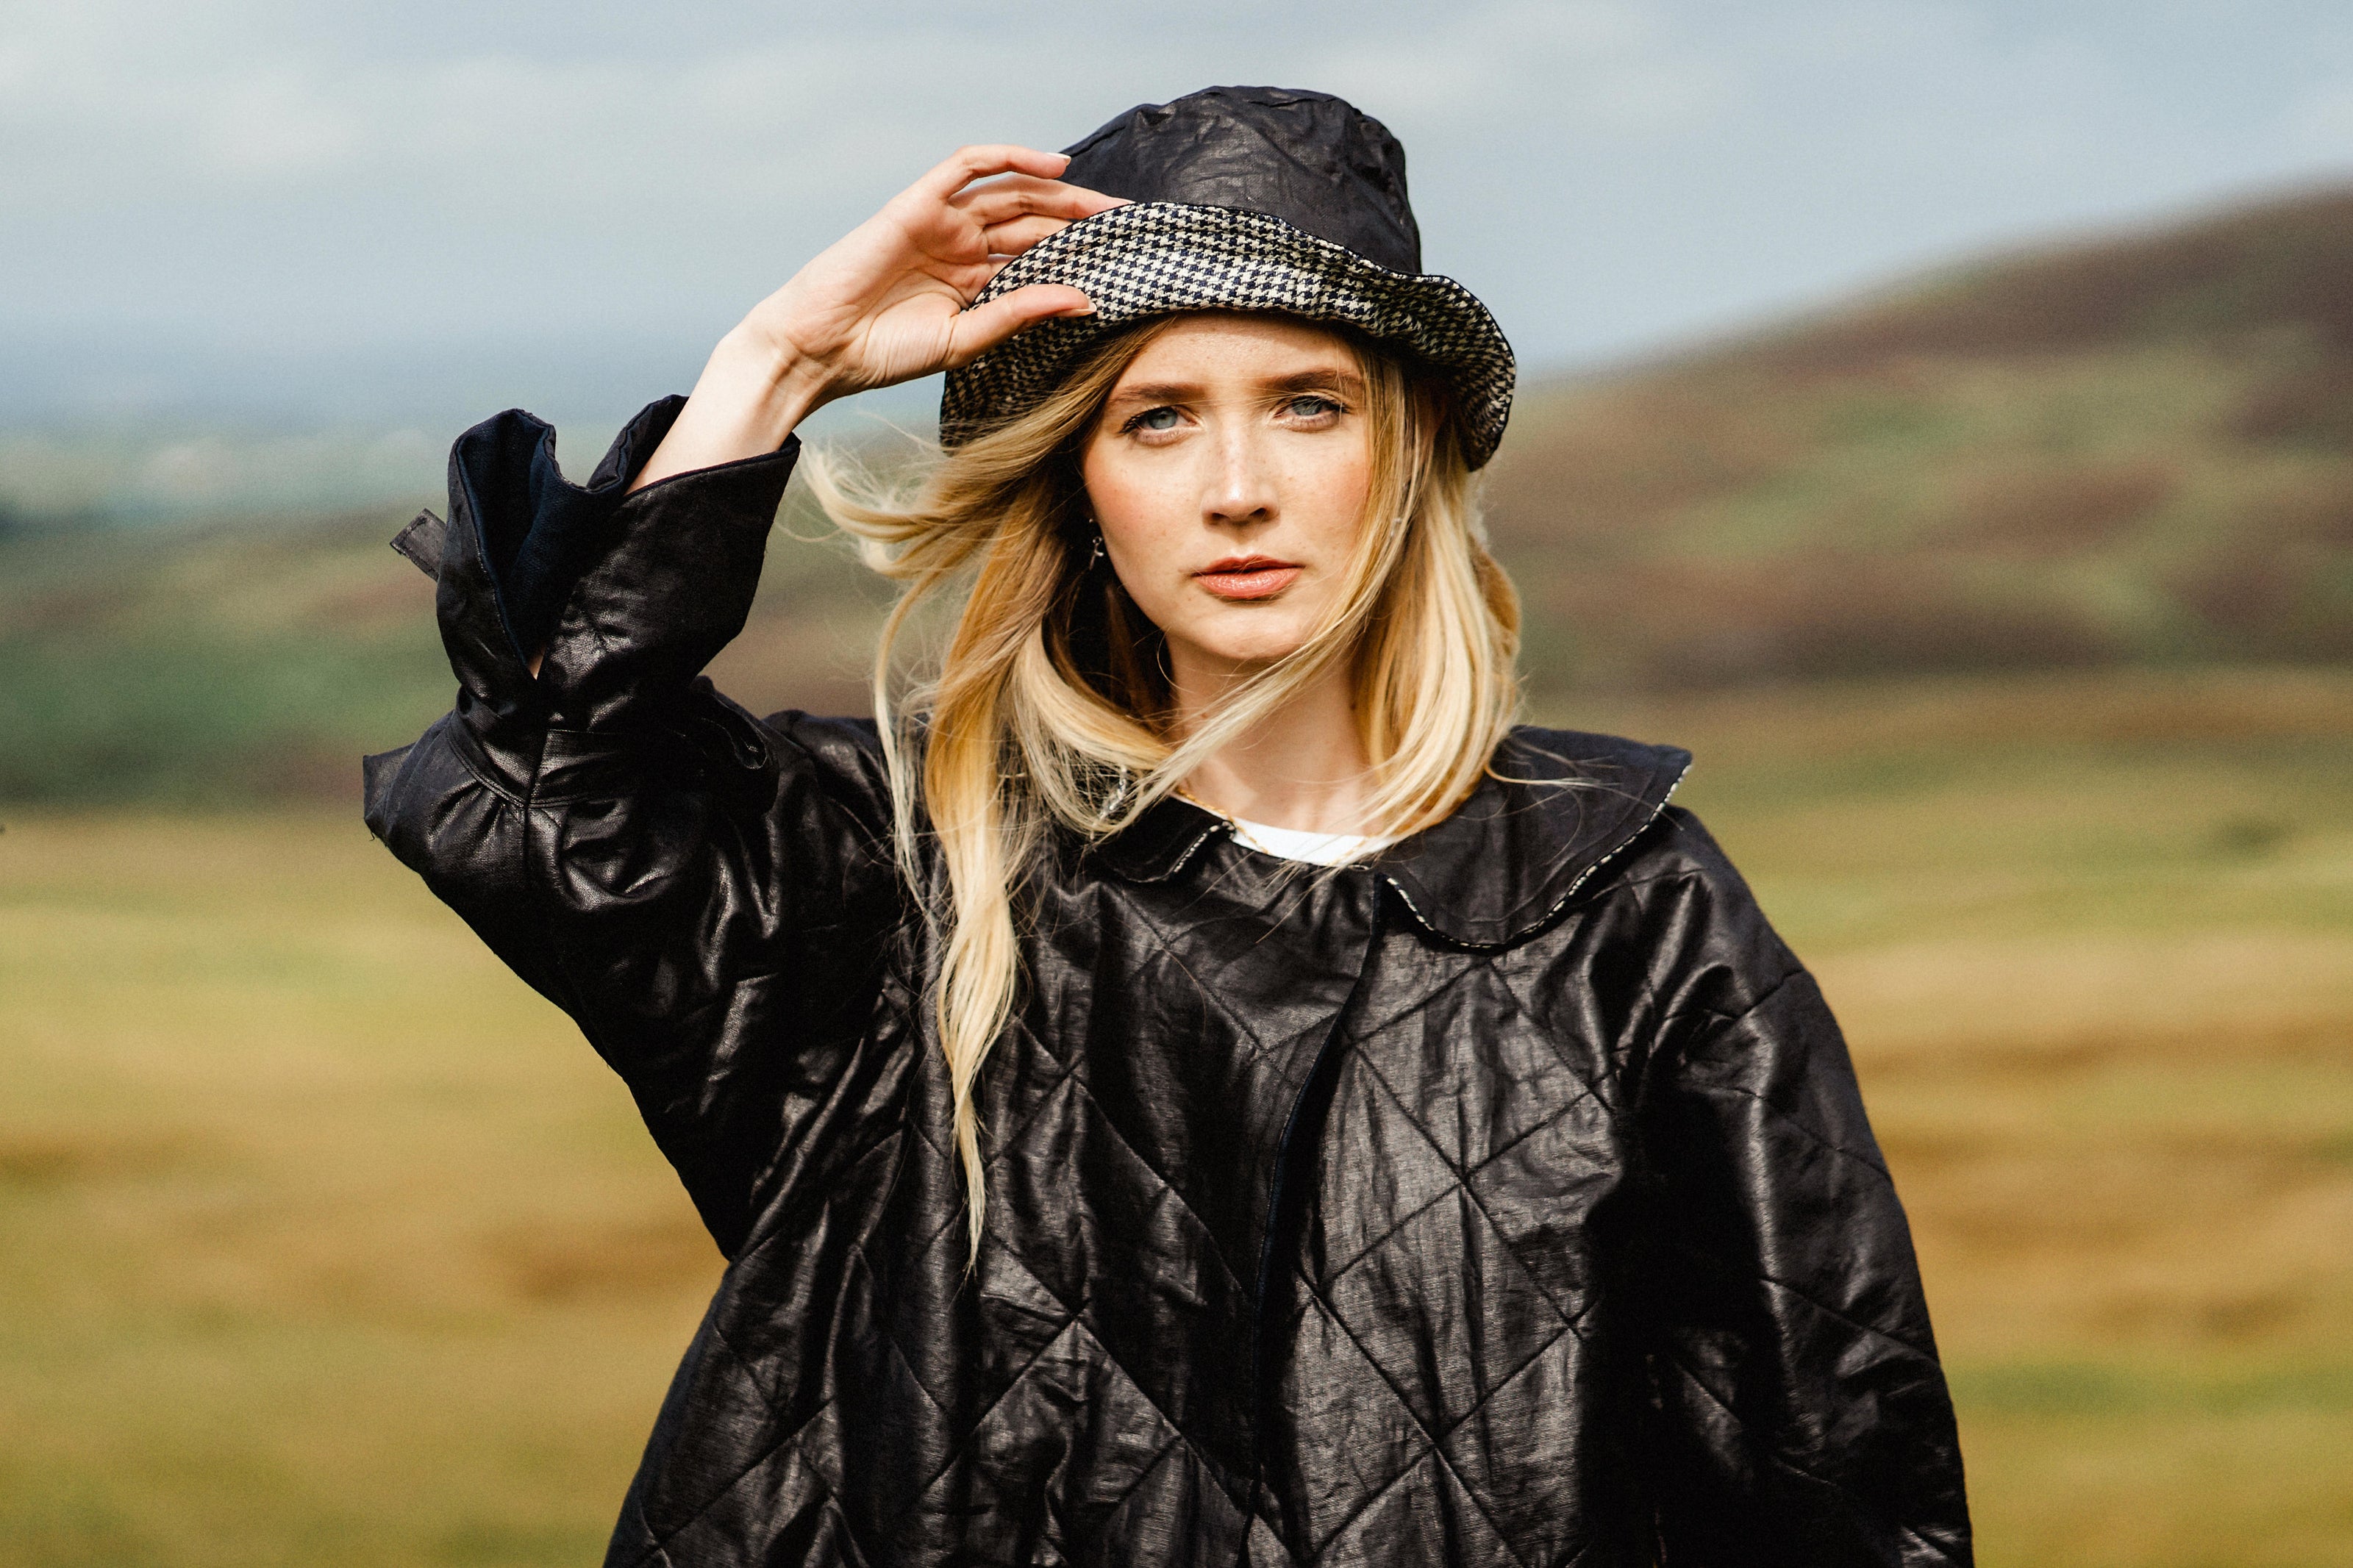 HlLLSBOROUGH HAT | For the days of long walks and good sea air. Inspired by Amy’s (our designer) favourite forest walks, the black beetled linen is contrasted vintage houndstooth irish linen made with Irish grown flax. Made to shield your sweet face from